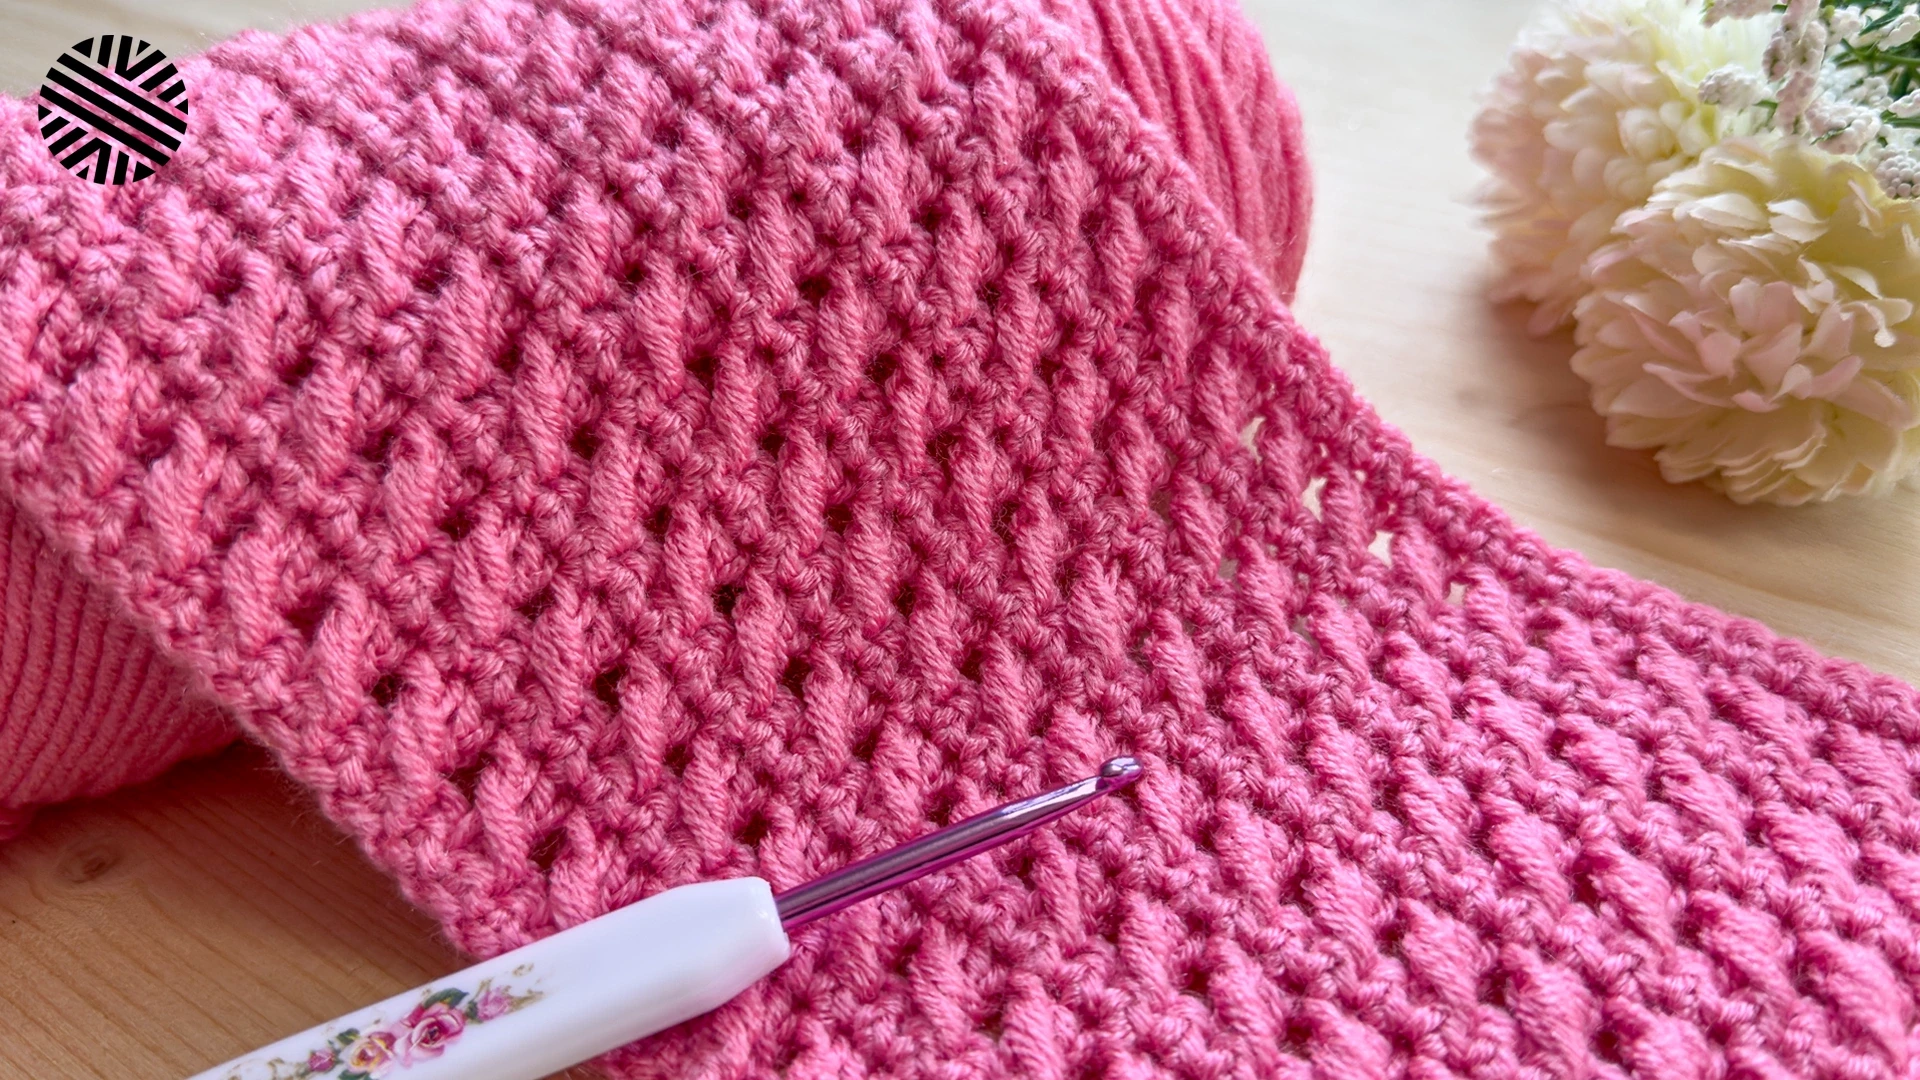 All about crochet hooks – Dances With Wools